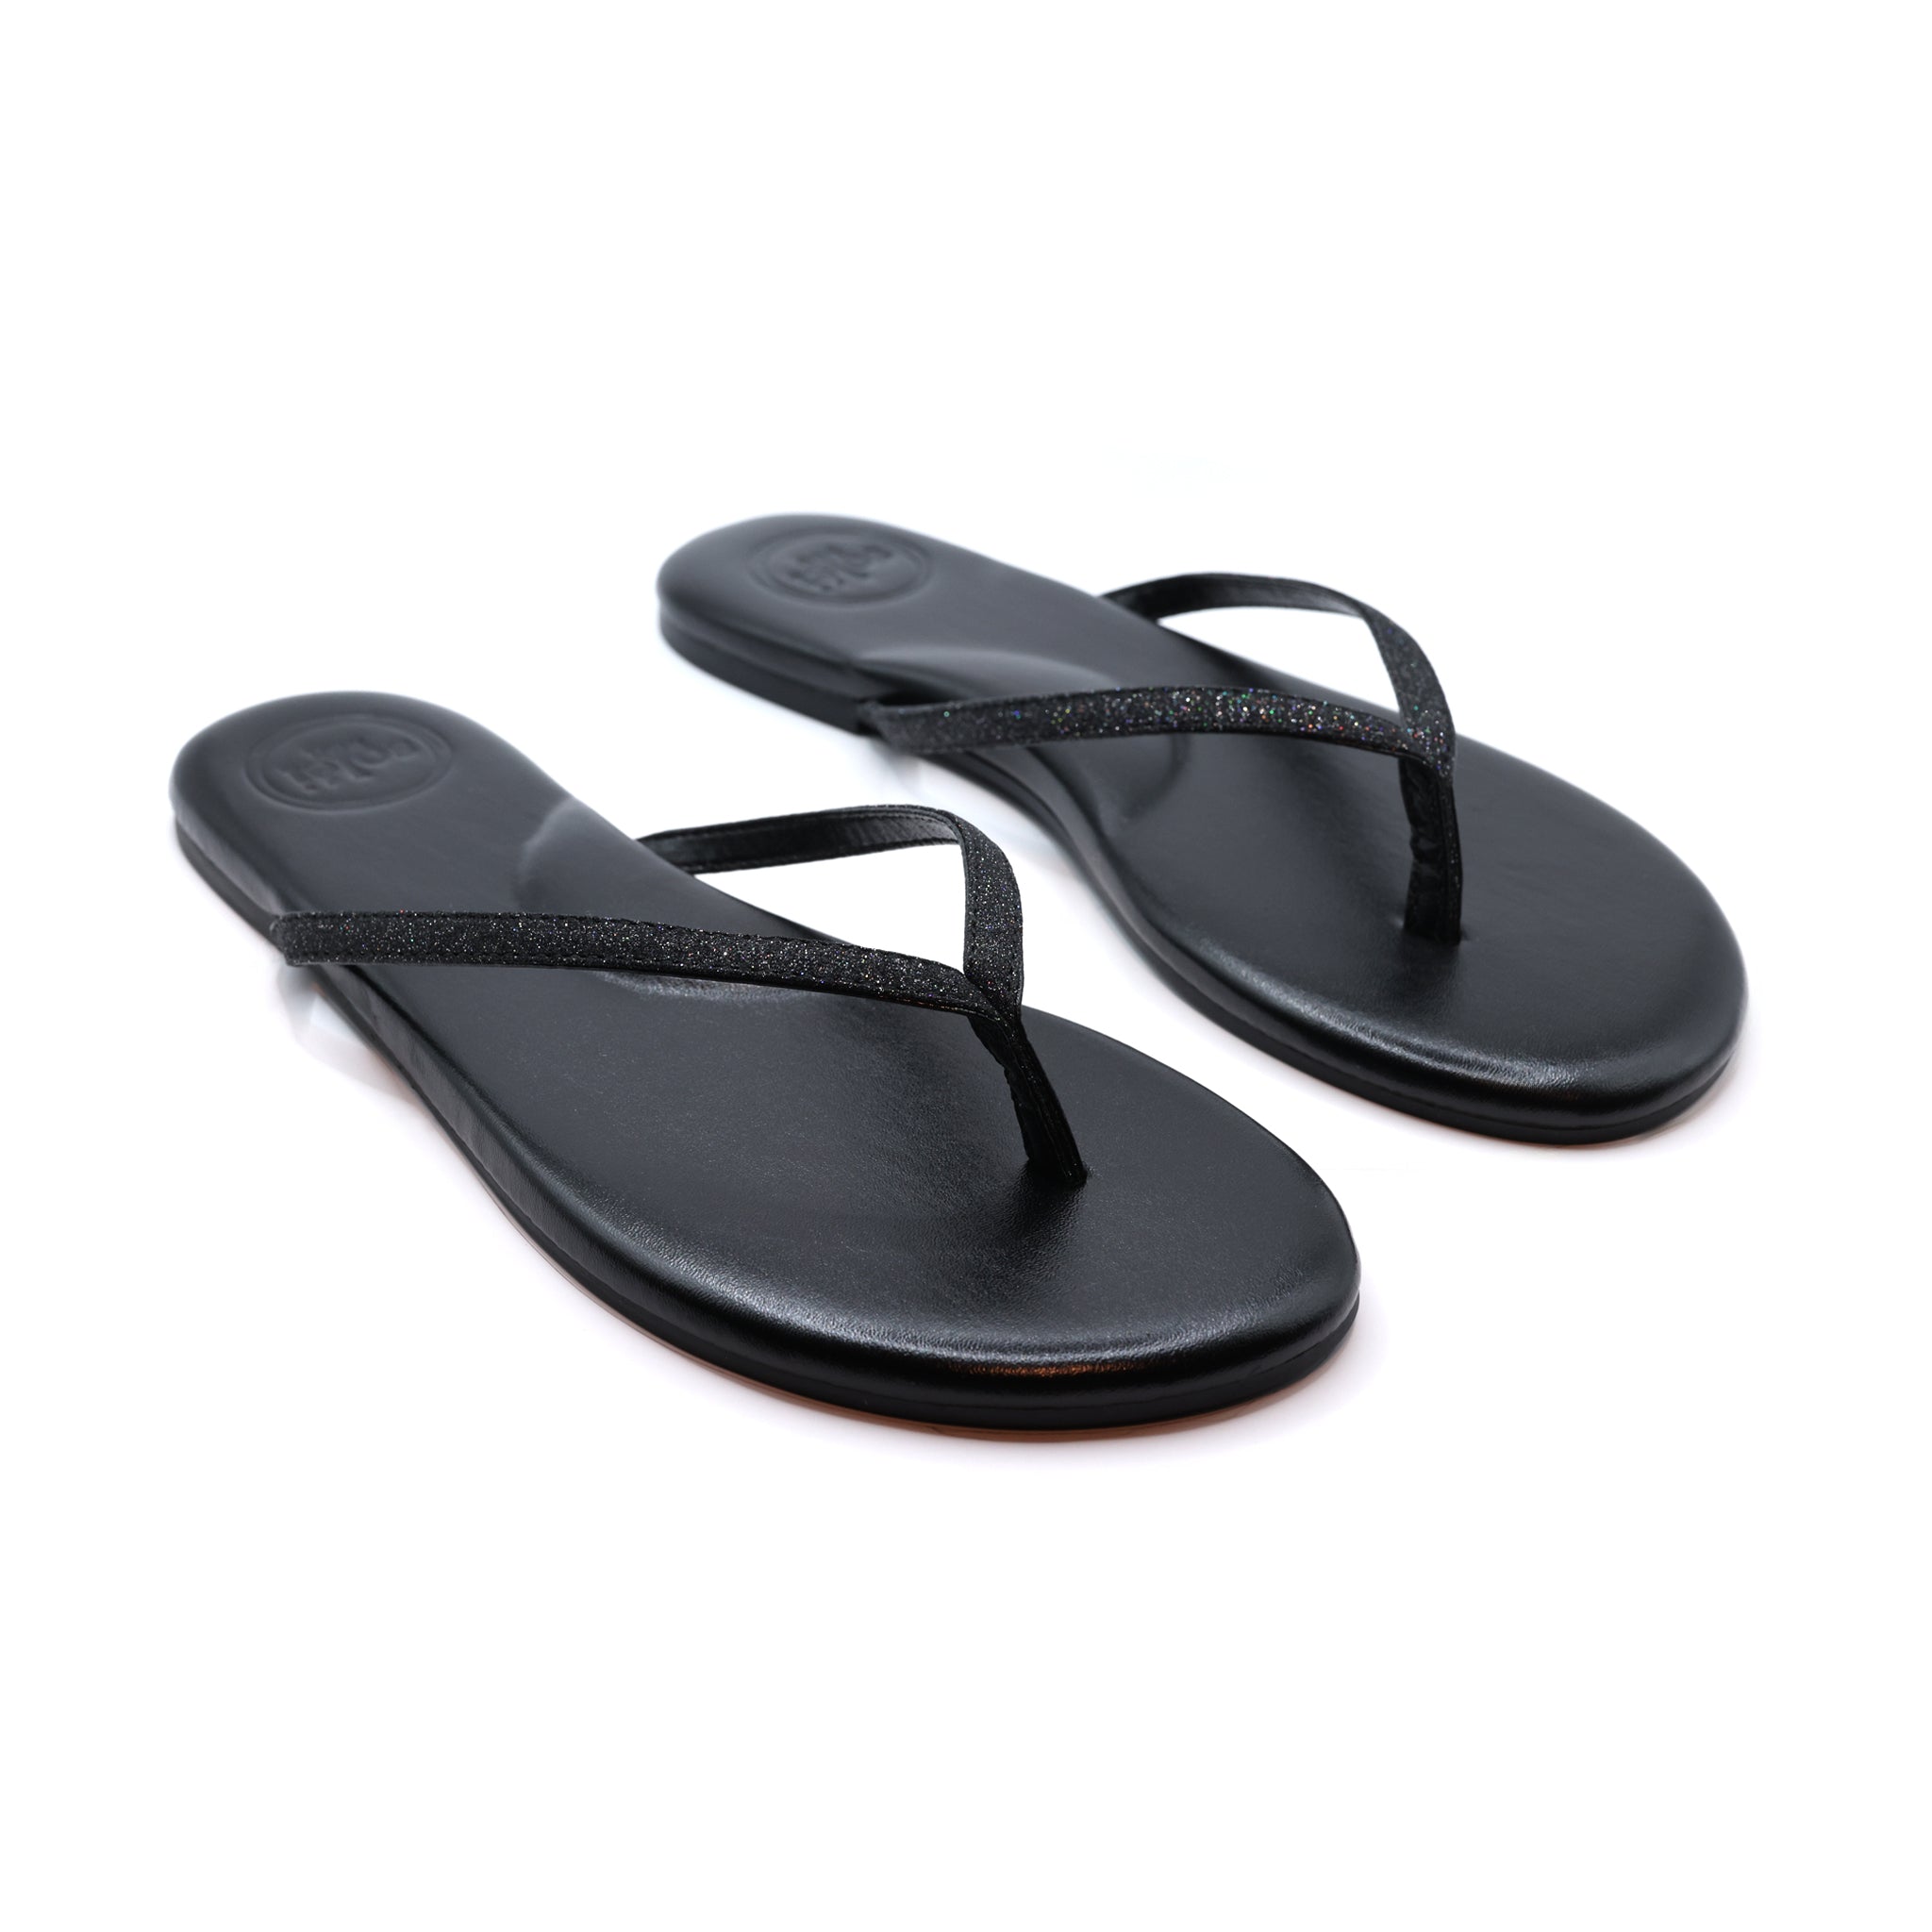 Women's think strap flip flop sandal. Black with Black and Glitter straps. Comfort and style. Padded footbed and arch support.